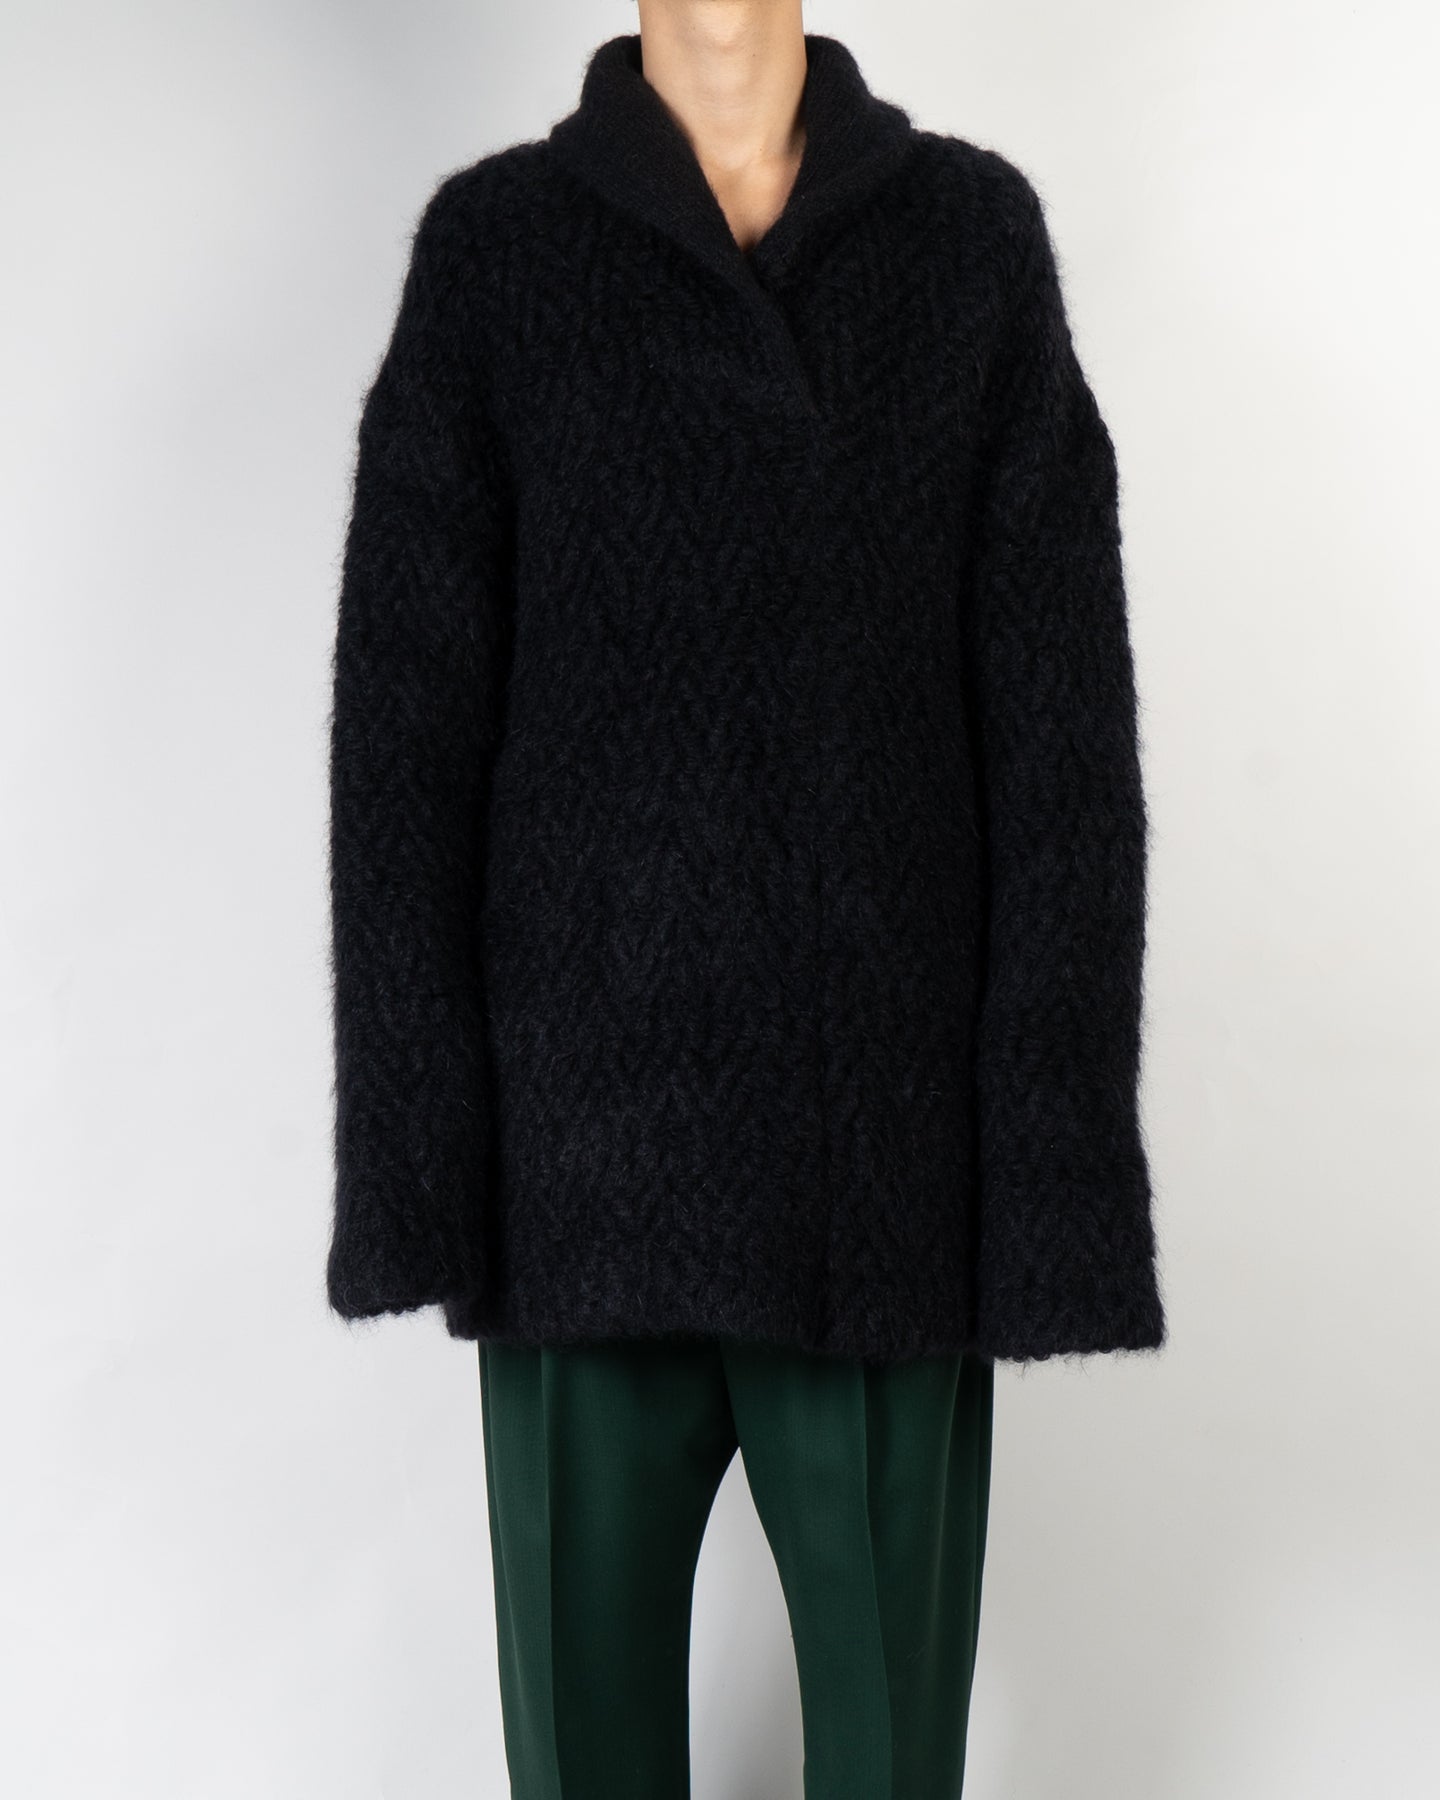 FW15 Black Oversized Cable Knit